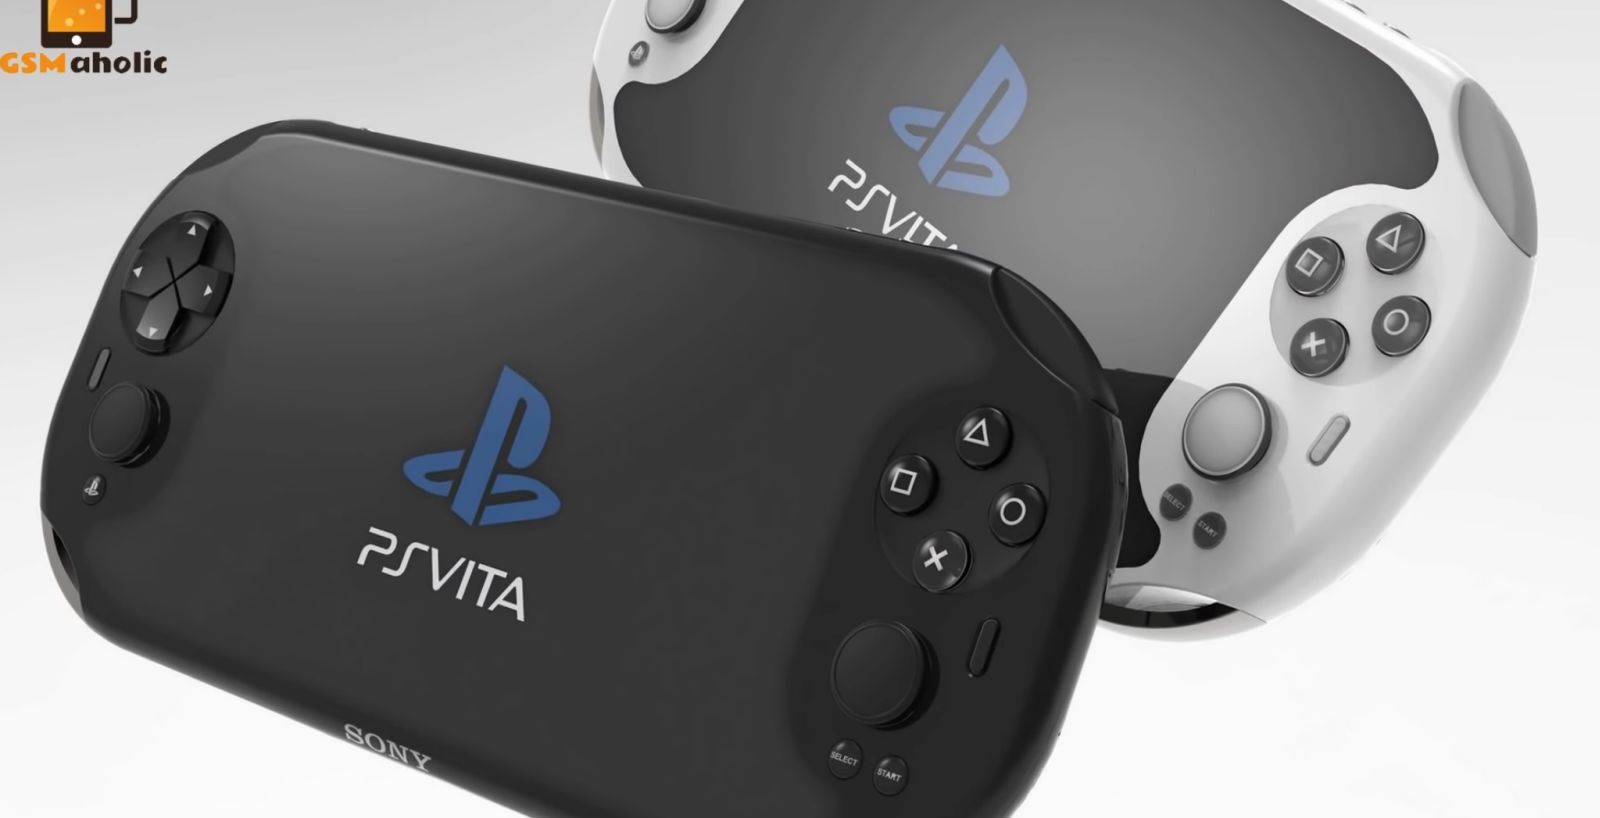 Sony Playstation Ps Vita X 5g Is A New Portable Console Dream Concept Concept Phones